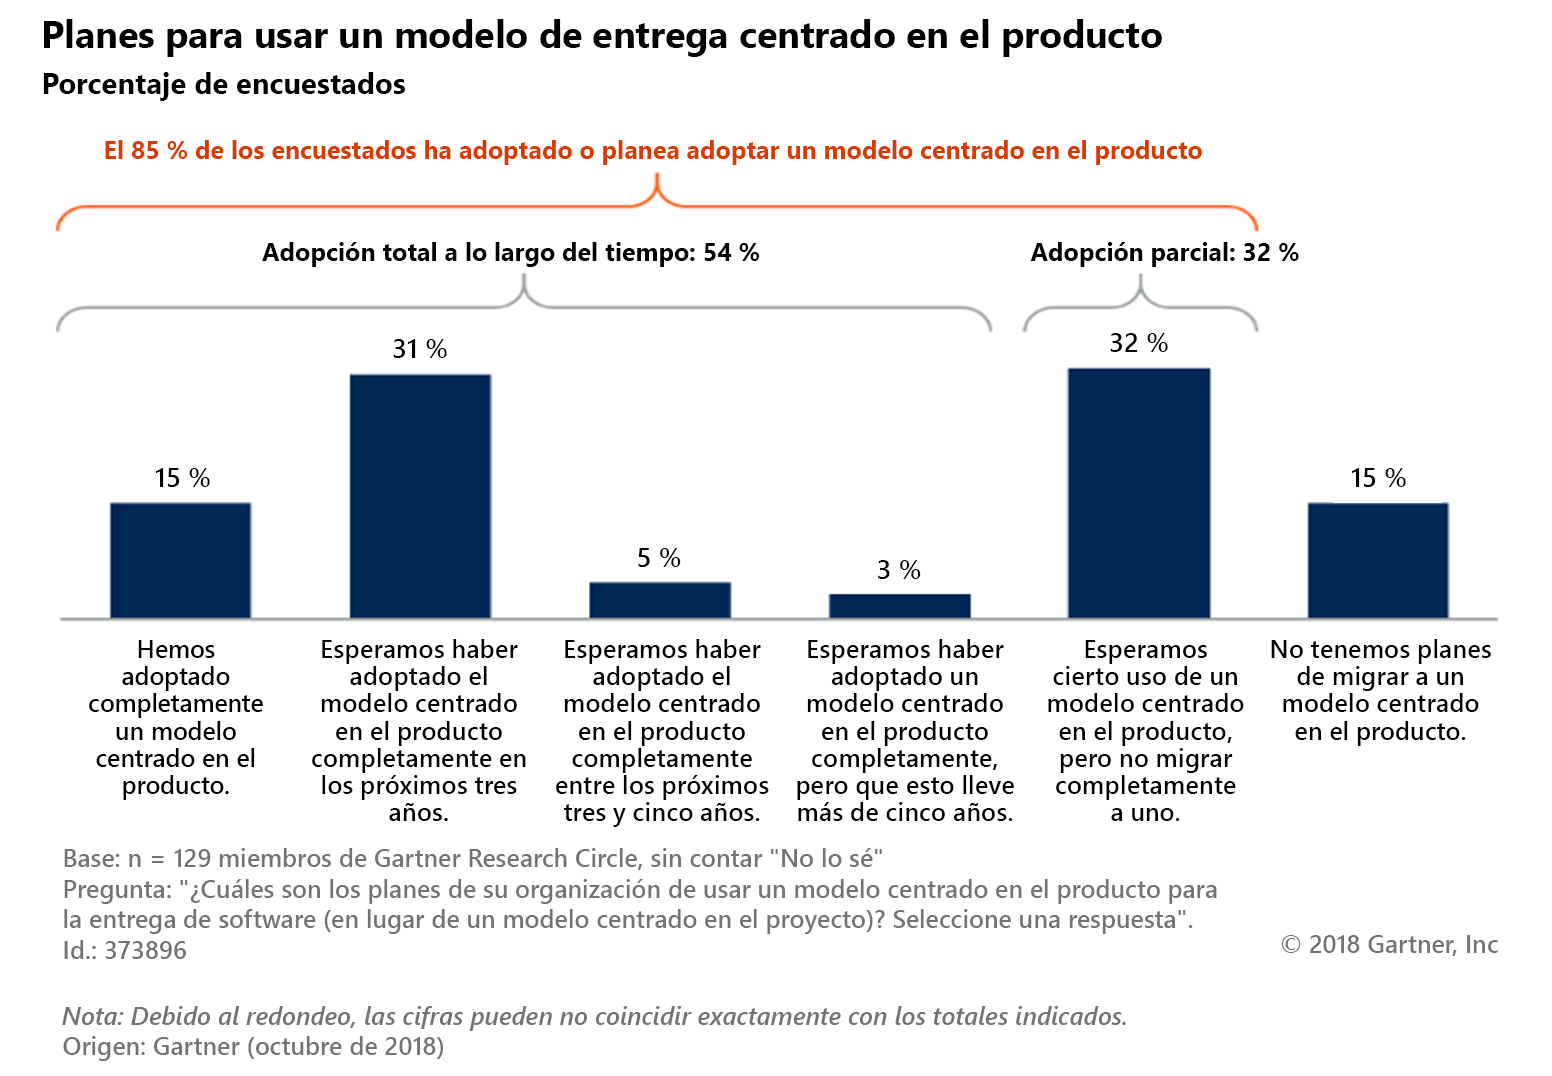 Diagram depicts product-centric model adoption over time. In total, 85% of the respondents have adopted or plan to adopt a product-centric model. Full adoption over time happens for 54% of the respondents, and partial adoption for 32%. 15% of the respondents say they have fully adopted a product-centric model. 31% expect it to be fully adopted within the next three years. 5% expect to adopt the product-centric model in the next three to five years. 3% expect the adoption process to take longer than five years. 32% of the respondents expect some use of a product-centric model, but not to fully move to one. 15% of the respondents do not have plans to move to a product-centric model. The survey was conducted on 129 Gartner Research Circle members. The question was: What are your organization’s plans for using a product-centric model for software delivery (versus a project-centric model)? Please select one response.